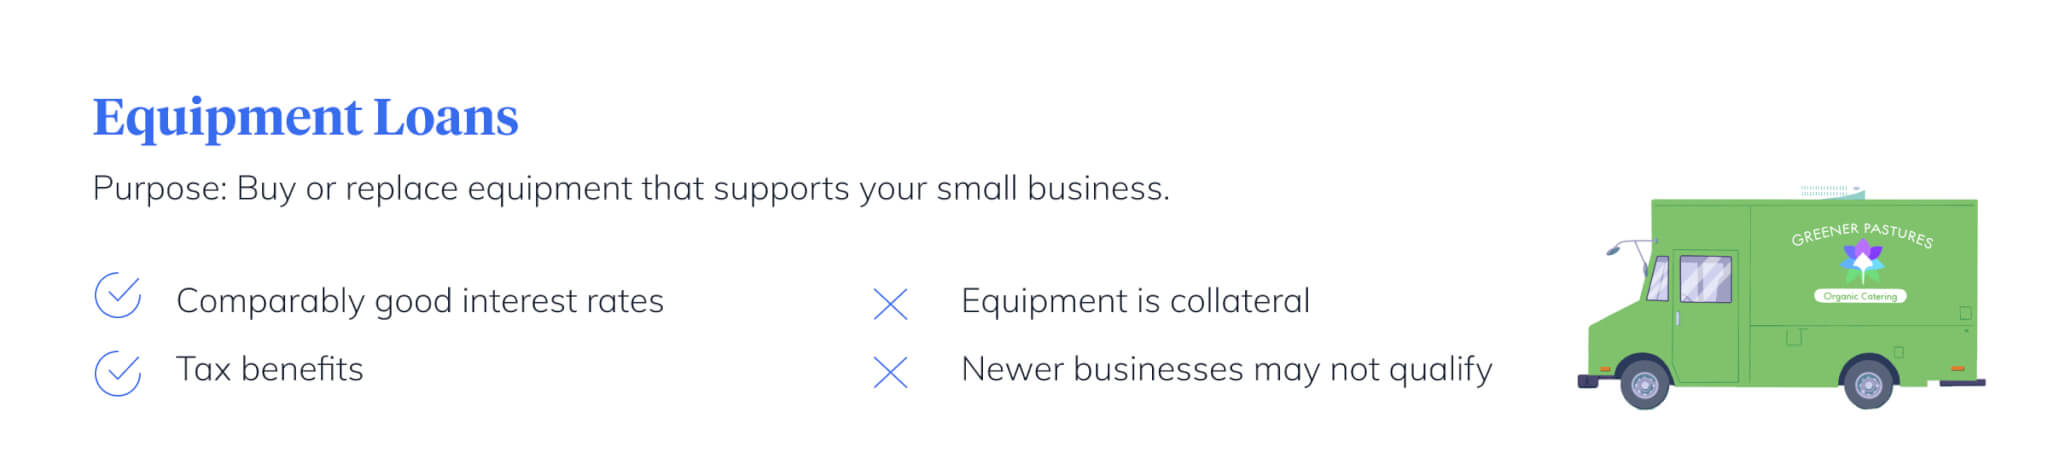 small business equipment loans pros and cons